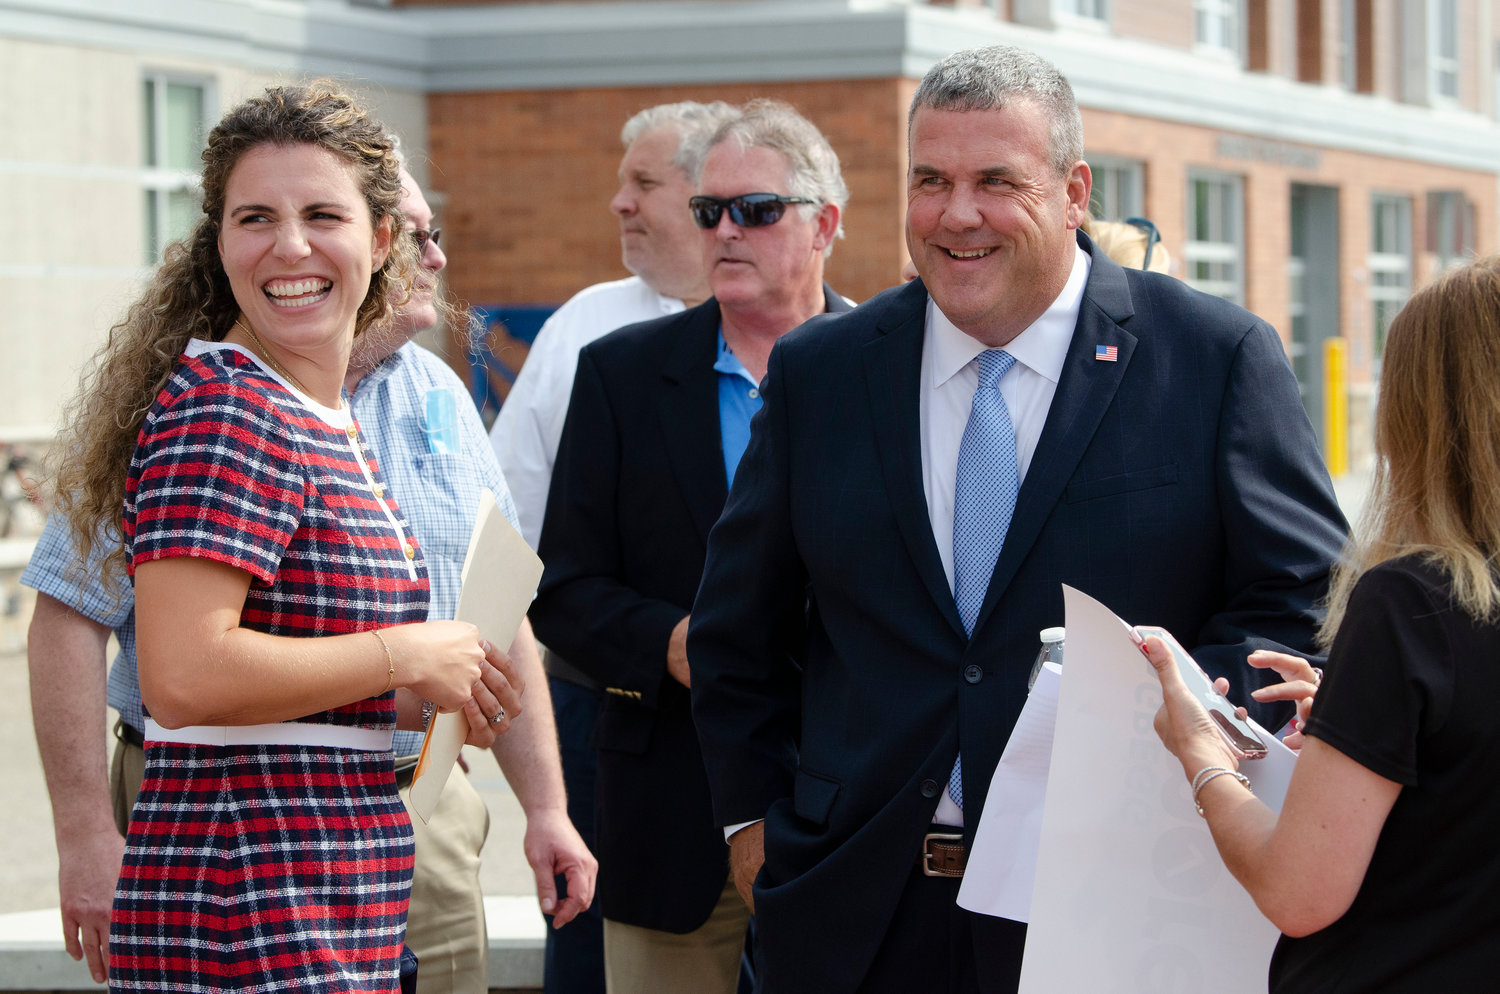 State Representative Katherine Kazarian (D-District 63) (left) and Representative Gregg Amore converse with friends and colleagues before Mr. Amore announced his candidacy to be the Democratic nominee for Rhode Island's next Secretary of State during a press conference Wednesday afternoon, Sept. 15, held at his career-long place of employ,  East Providence High School.